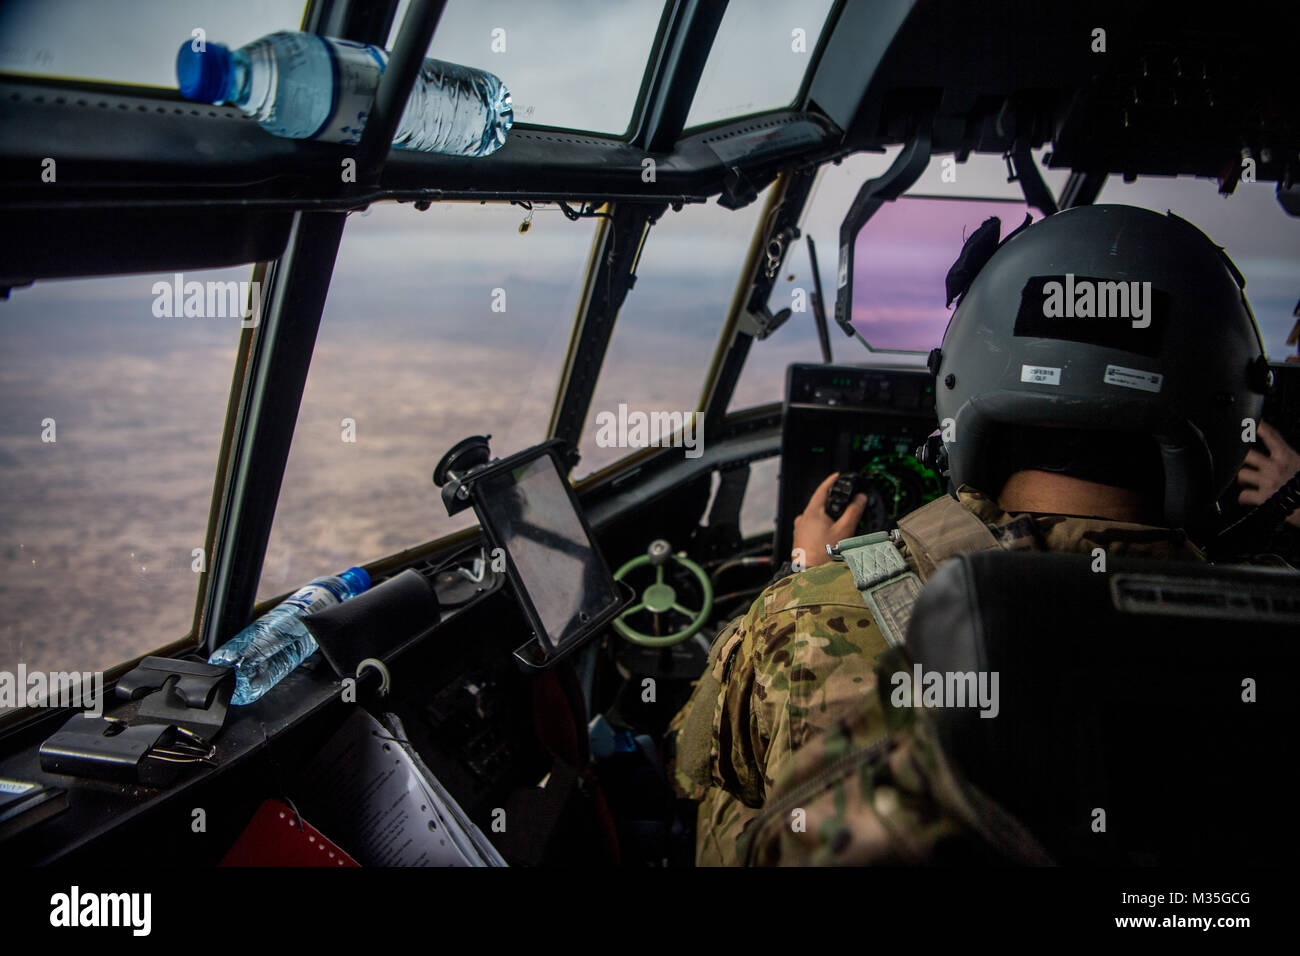 A U.S. Air Force C-130J Super Hercules pilot from the 774th Expeditionary Airlift Squadron flies a mission over Afghanistan to transport passengers and supplies to various bases throughout the country, Feb. 6, 2018. The C-130J is capable of operating from rough, dirt strips and is the prime transport for airdropping troops and equipment into hostile areas.(U.S. Air Force photo by SSgt Douglas Ellis) Stock Photo